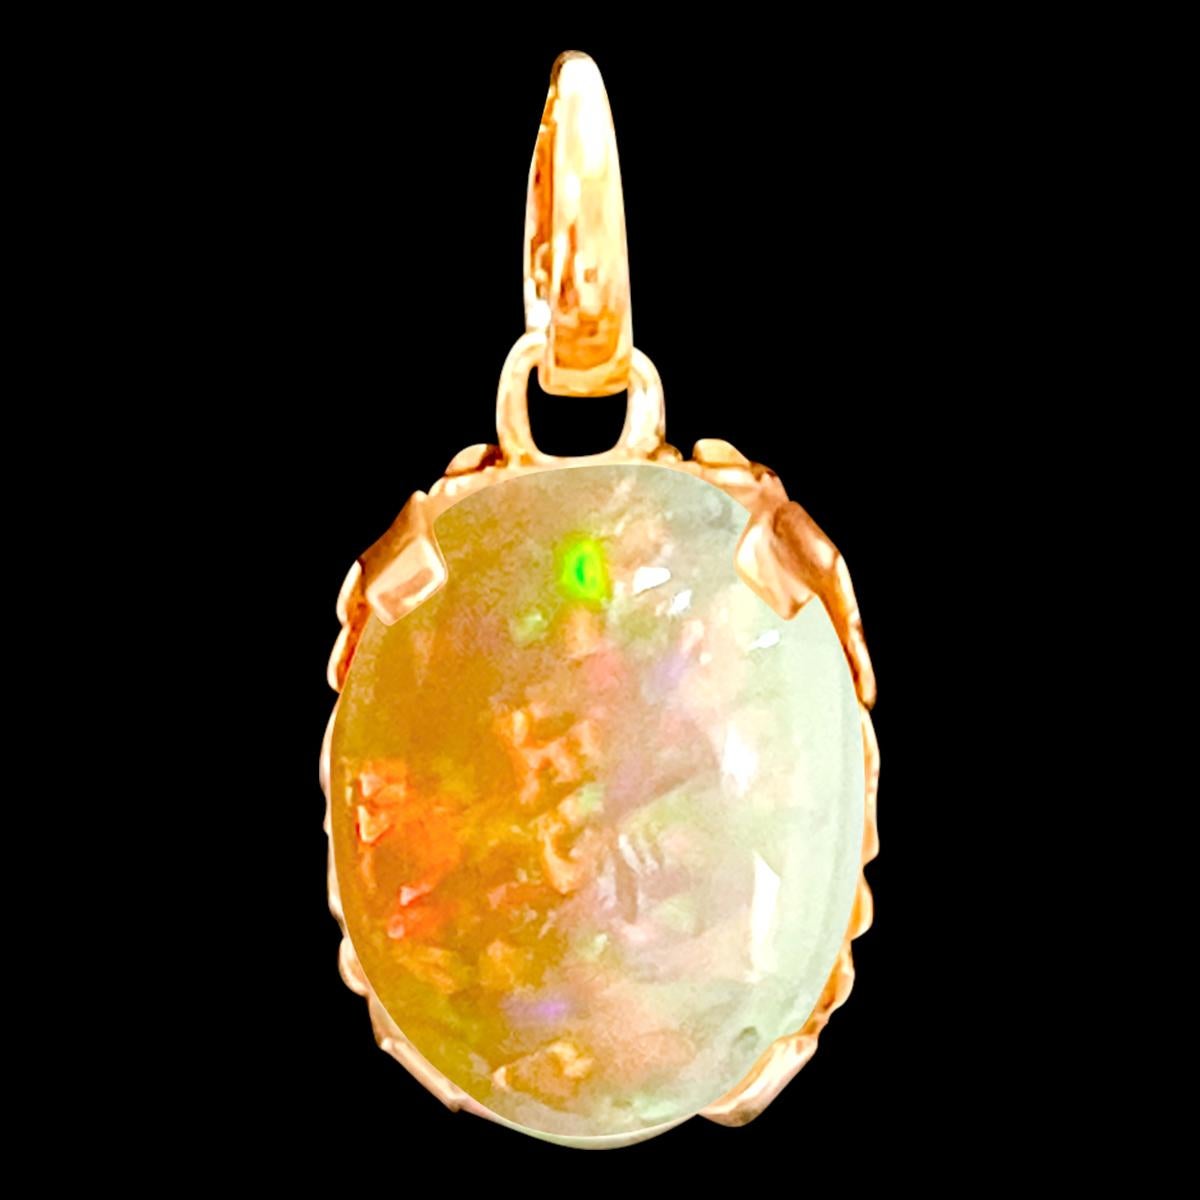 Approximately 9 Carat Very fine  Oval Ethiopian Opal Pendant / Necklace 18 Karat  yellow  gold with 18 Karat yellow Gold Chain 24